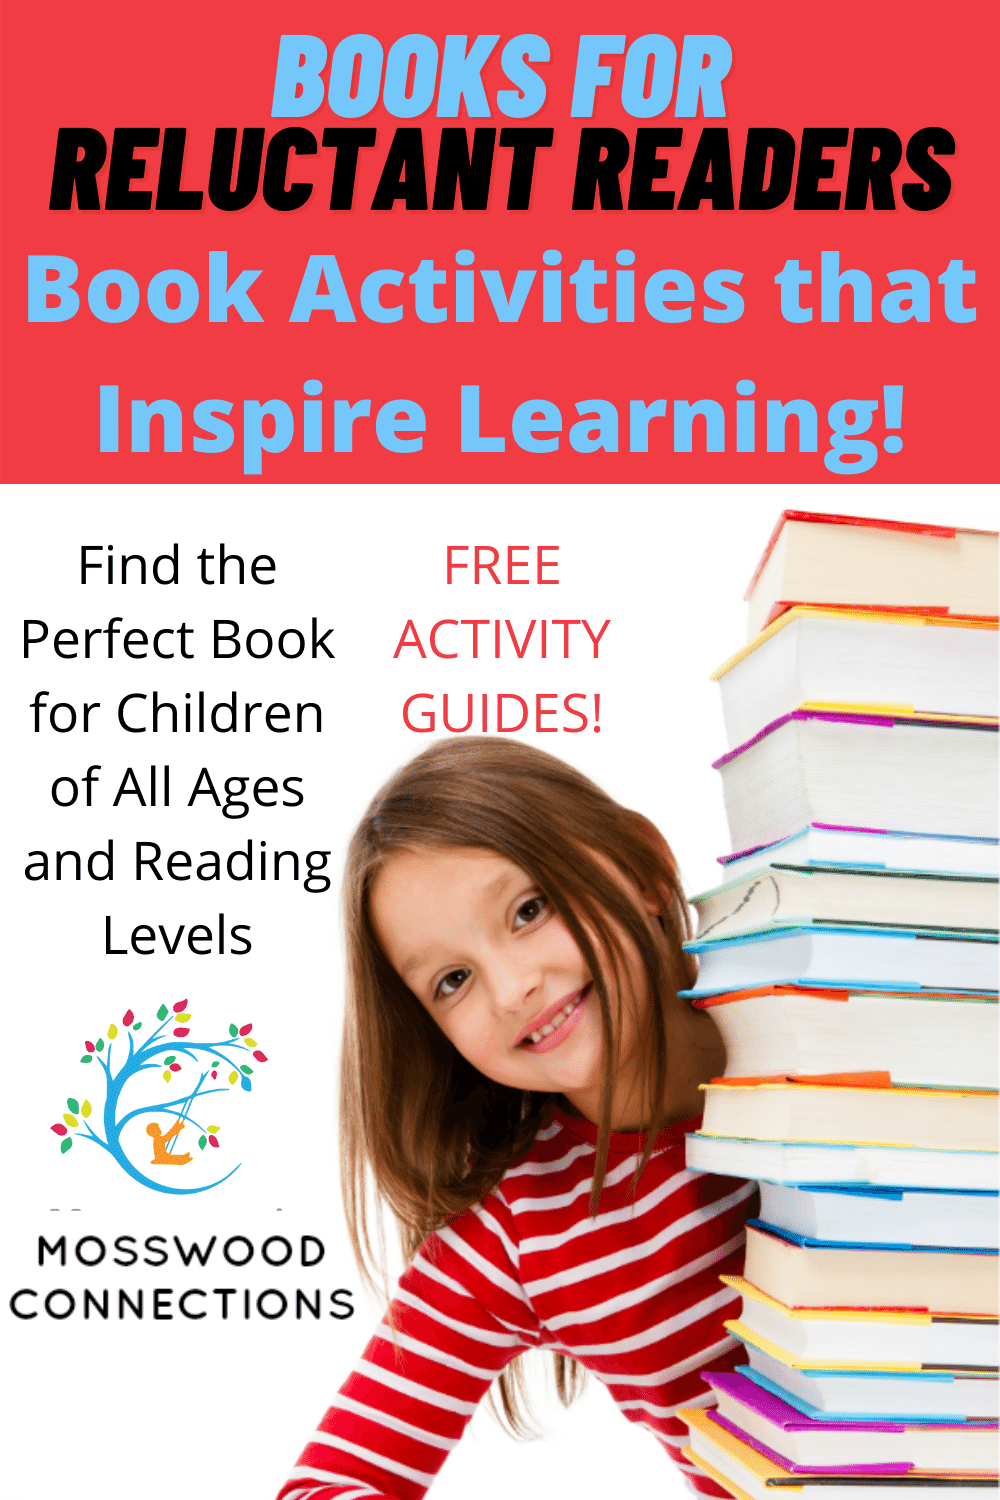 Help Children Develop Reading Fluency and Comprehension Skills: Books for Reluctant Readers #mosswoodconnections #literacy #reluctantreaders #chapterbooks #readingskills #readingfluency